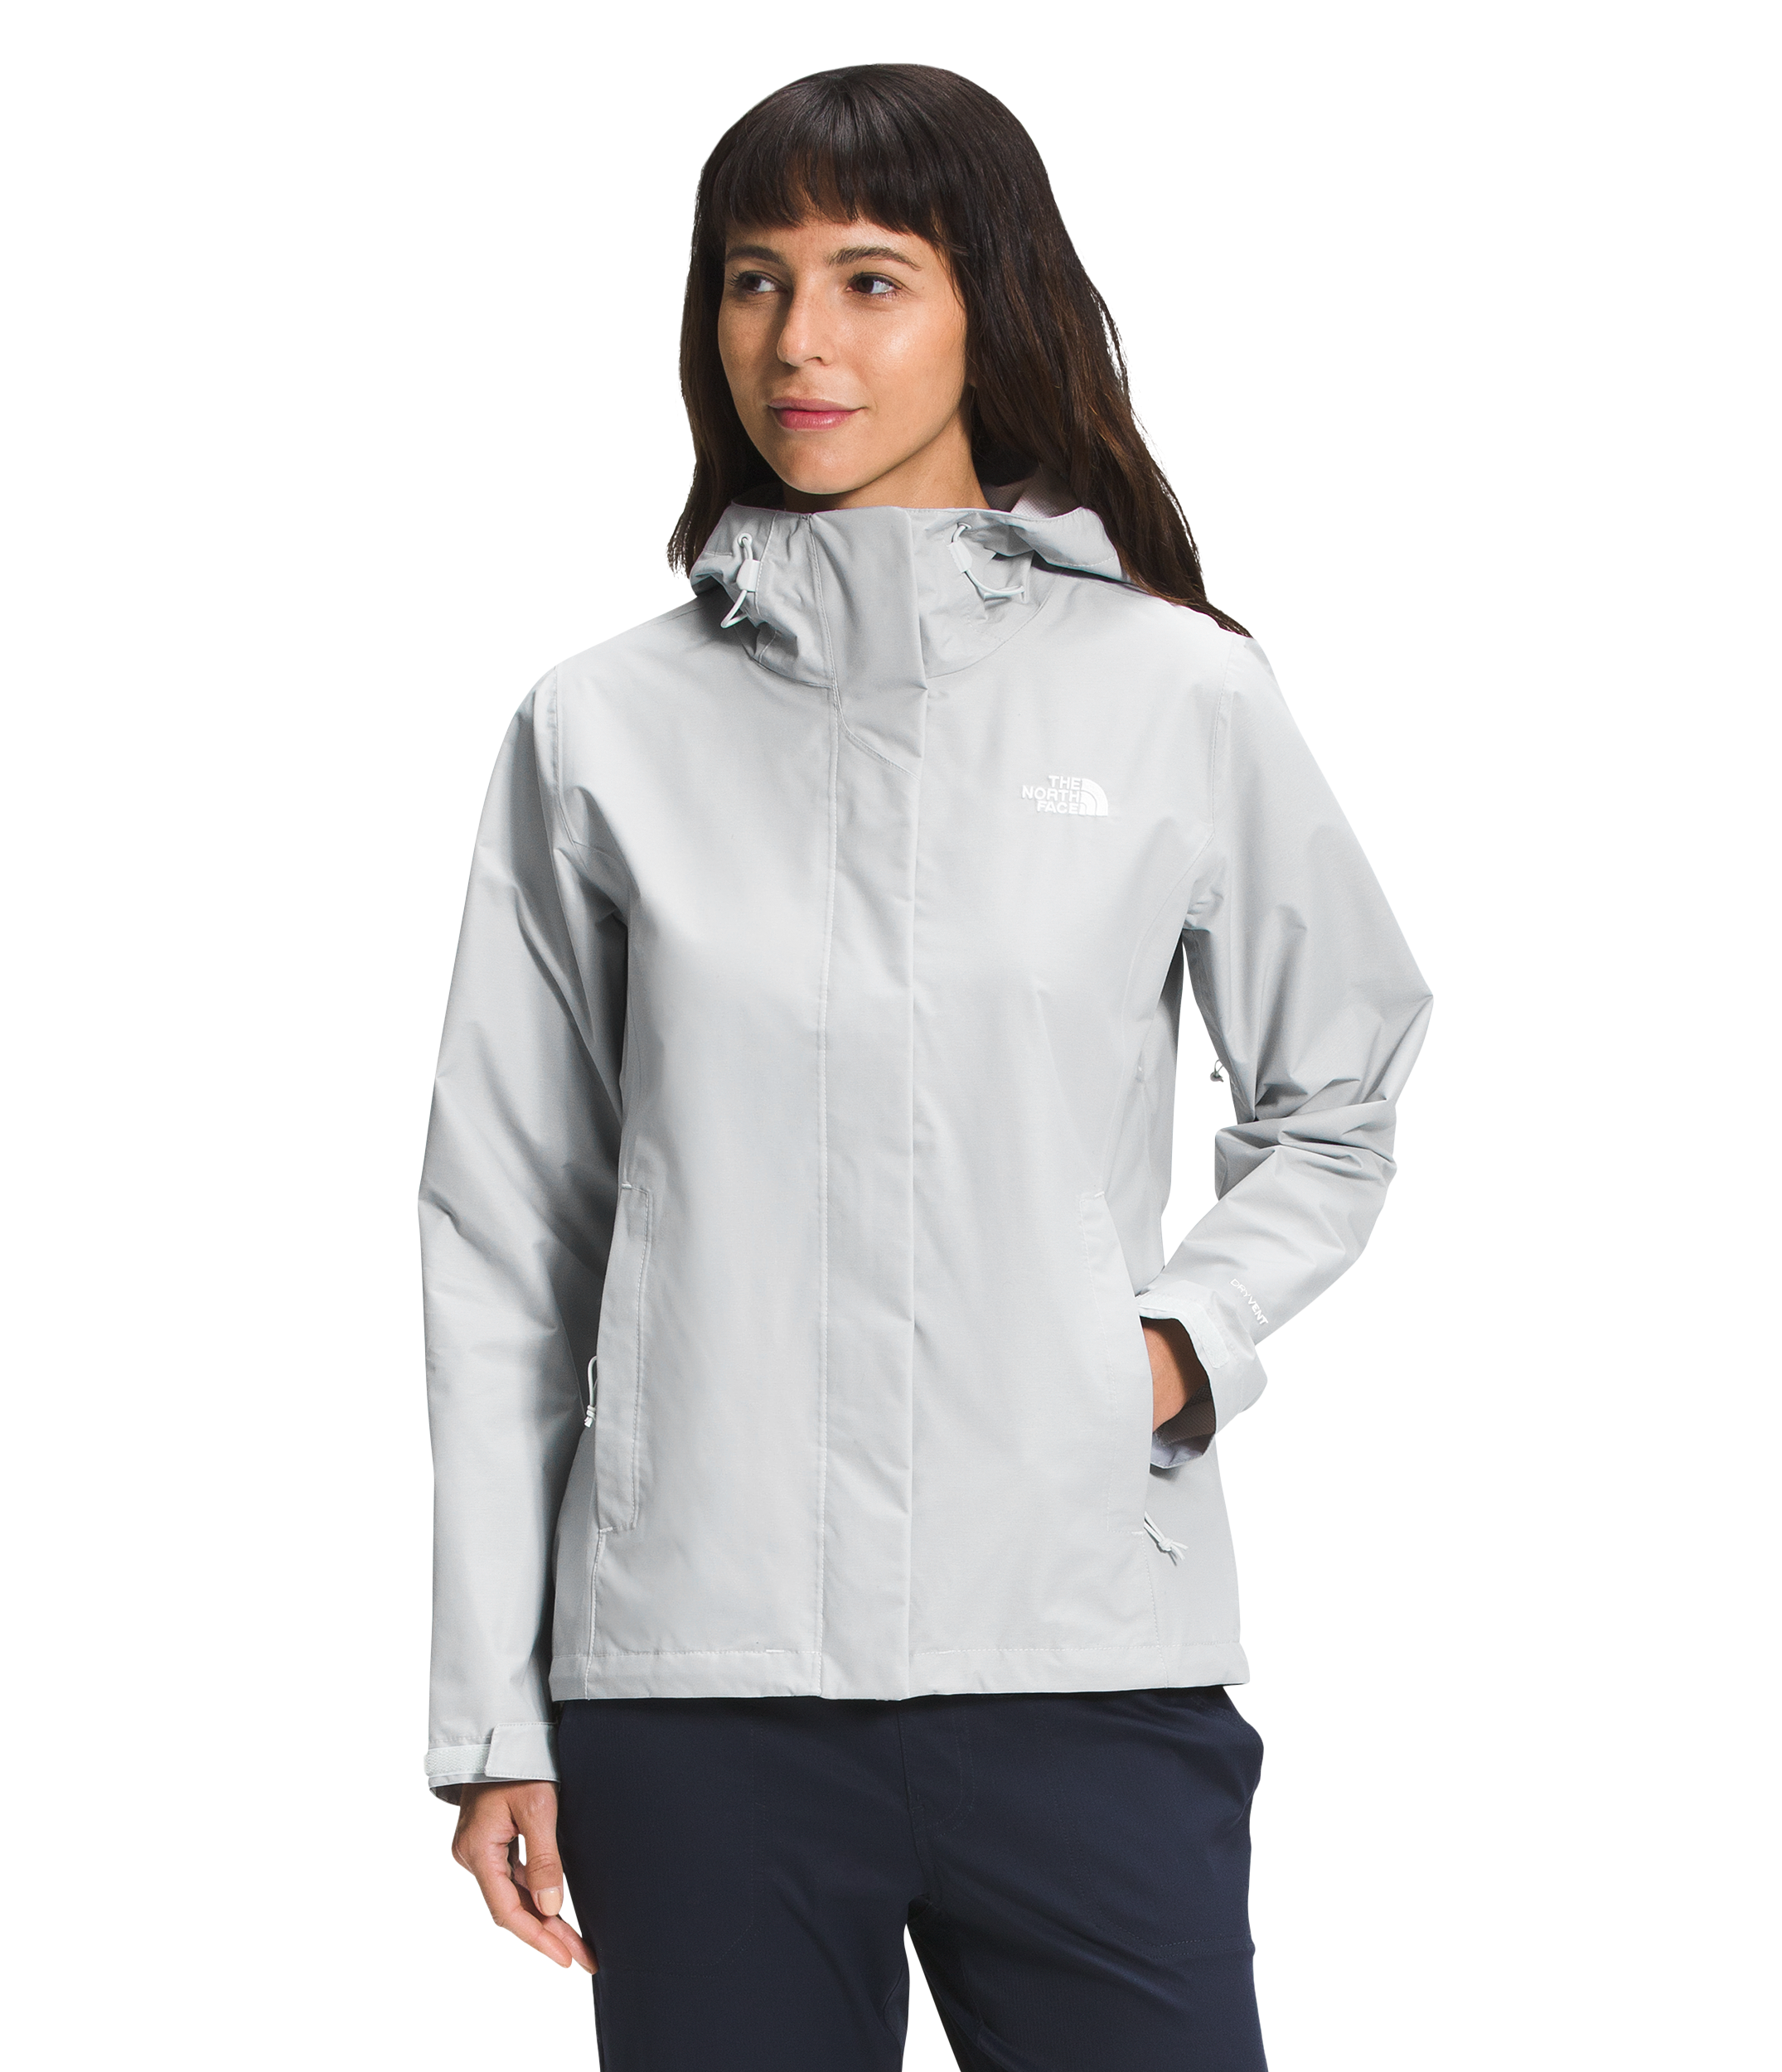 The North Face Venture 2 Jacket for Ladies - Light Grey Heather - S